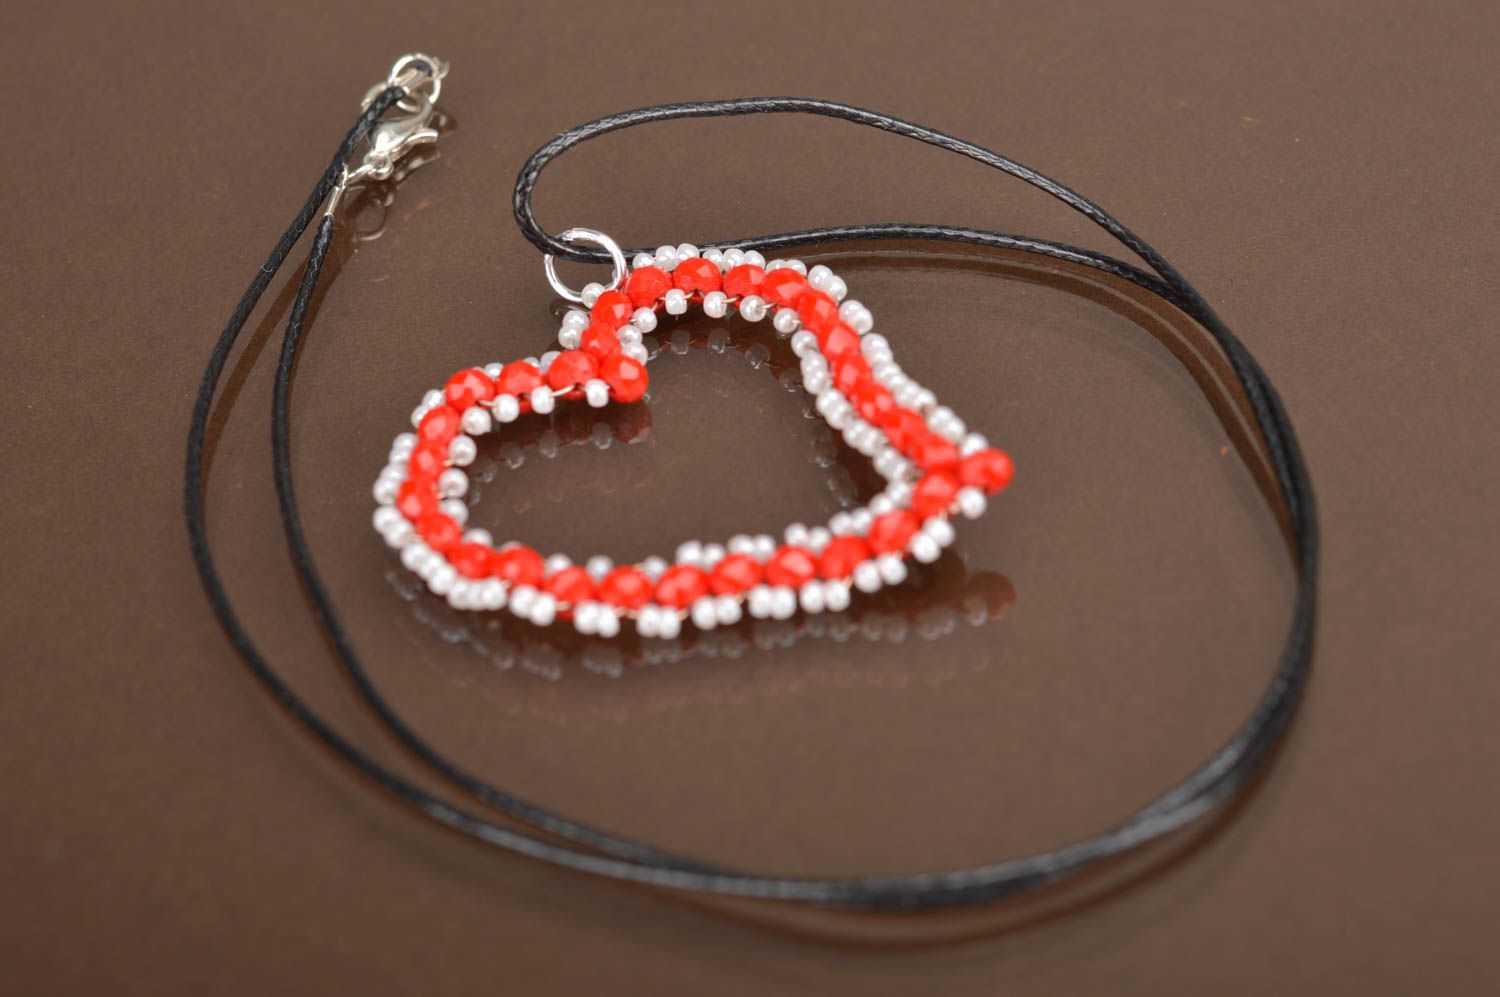 Handmade designer red heart shaped pendant with Czech crystal beads on cord photo 2